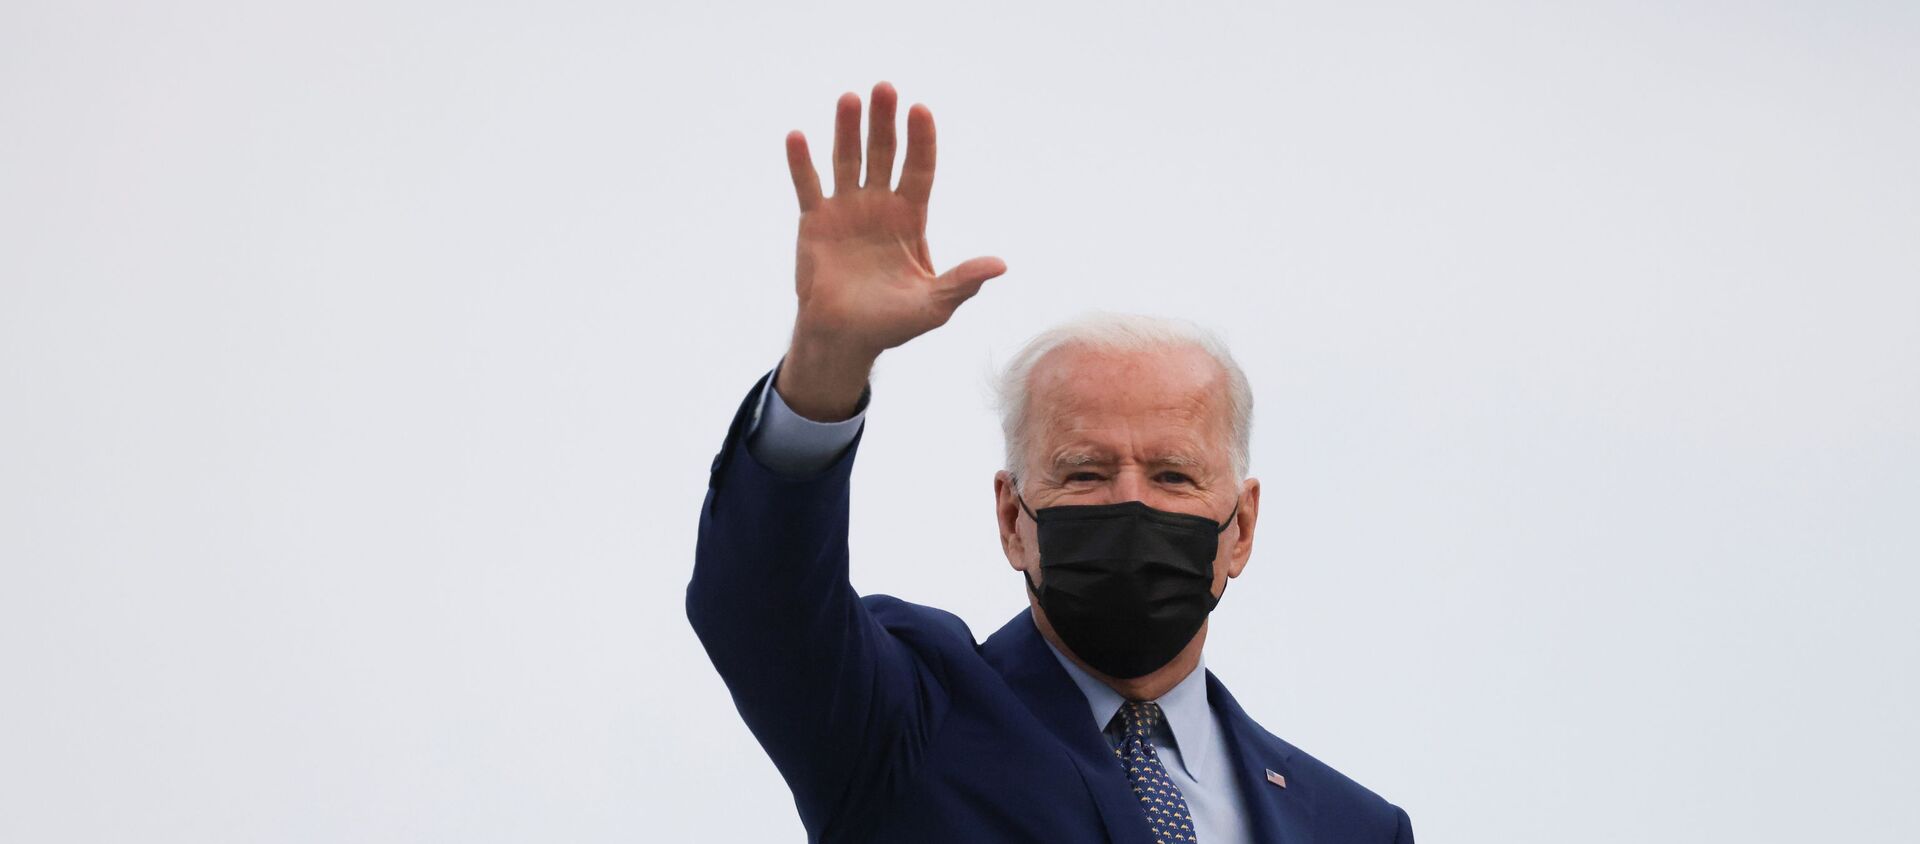 U.S. President Joe Biden waves as he boards Air Force One after attending the Democratic National Committee's Back on Track drive-in car rally to celebrate the president's 100th day in office, at Dobbins Air Reserve Base enroute to Joint Base Andrews, in Marietta, Georgia, U.S., April 29, 2021. - Sputnik International, 1920, 02.05.2021